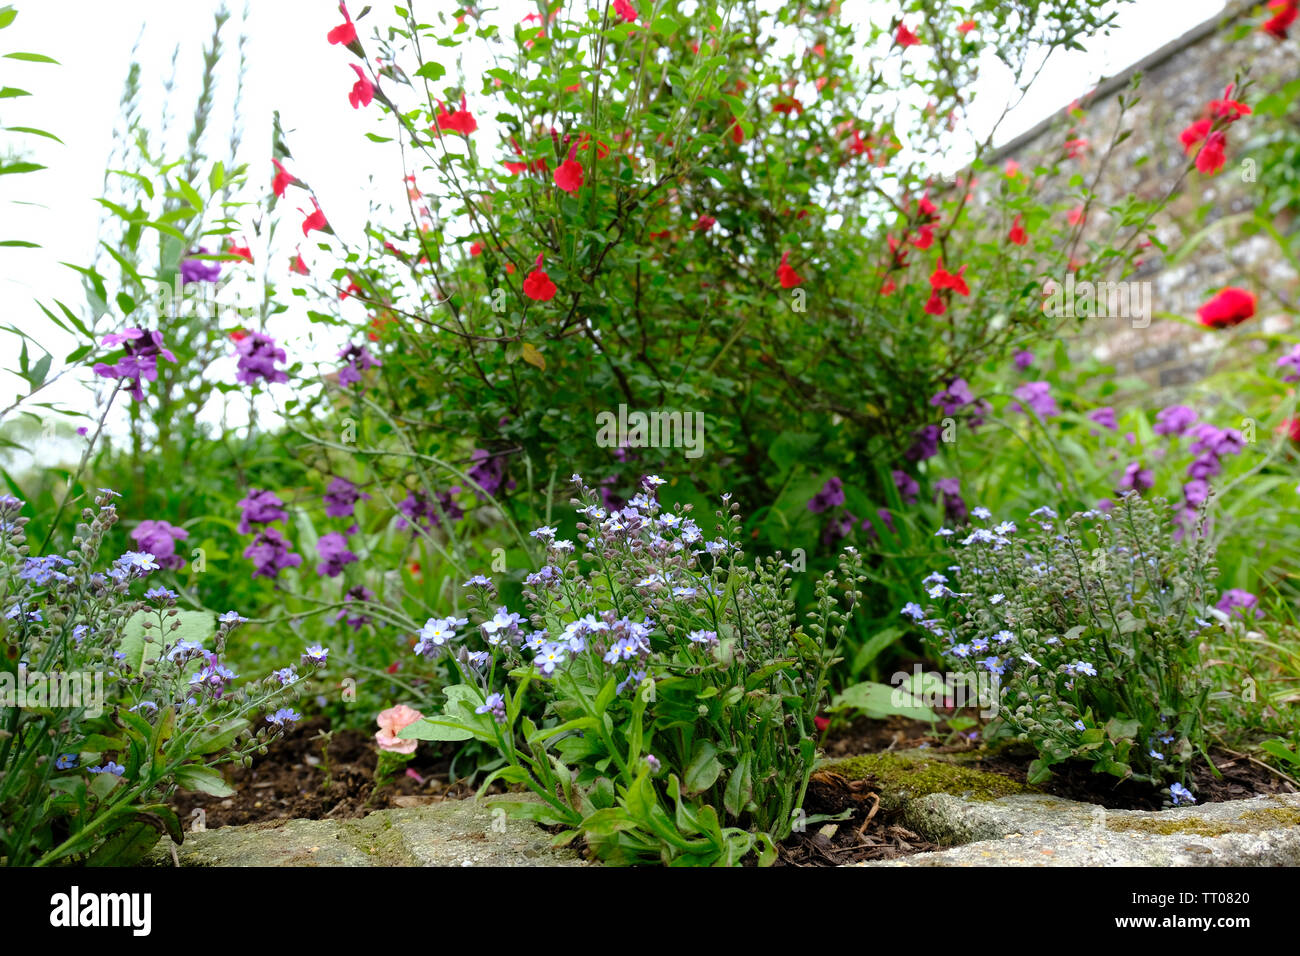 Sussex, UK. Random old fashioned cottage garden planting with Forget Me Nots, Wallflowers and Salvia 'Hot Lips' Stock Photo